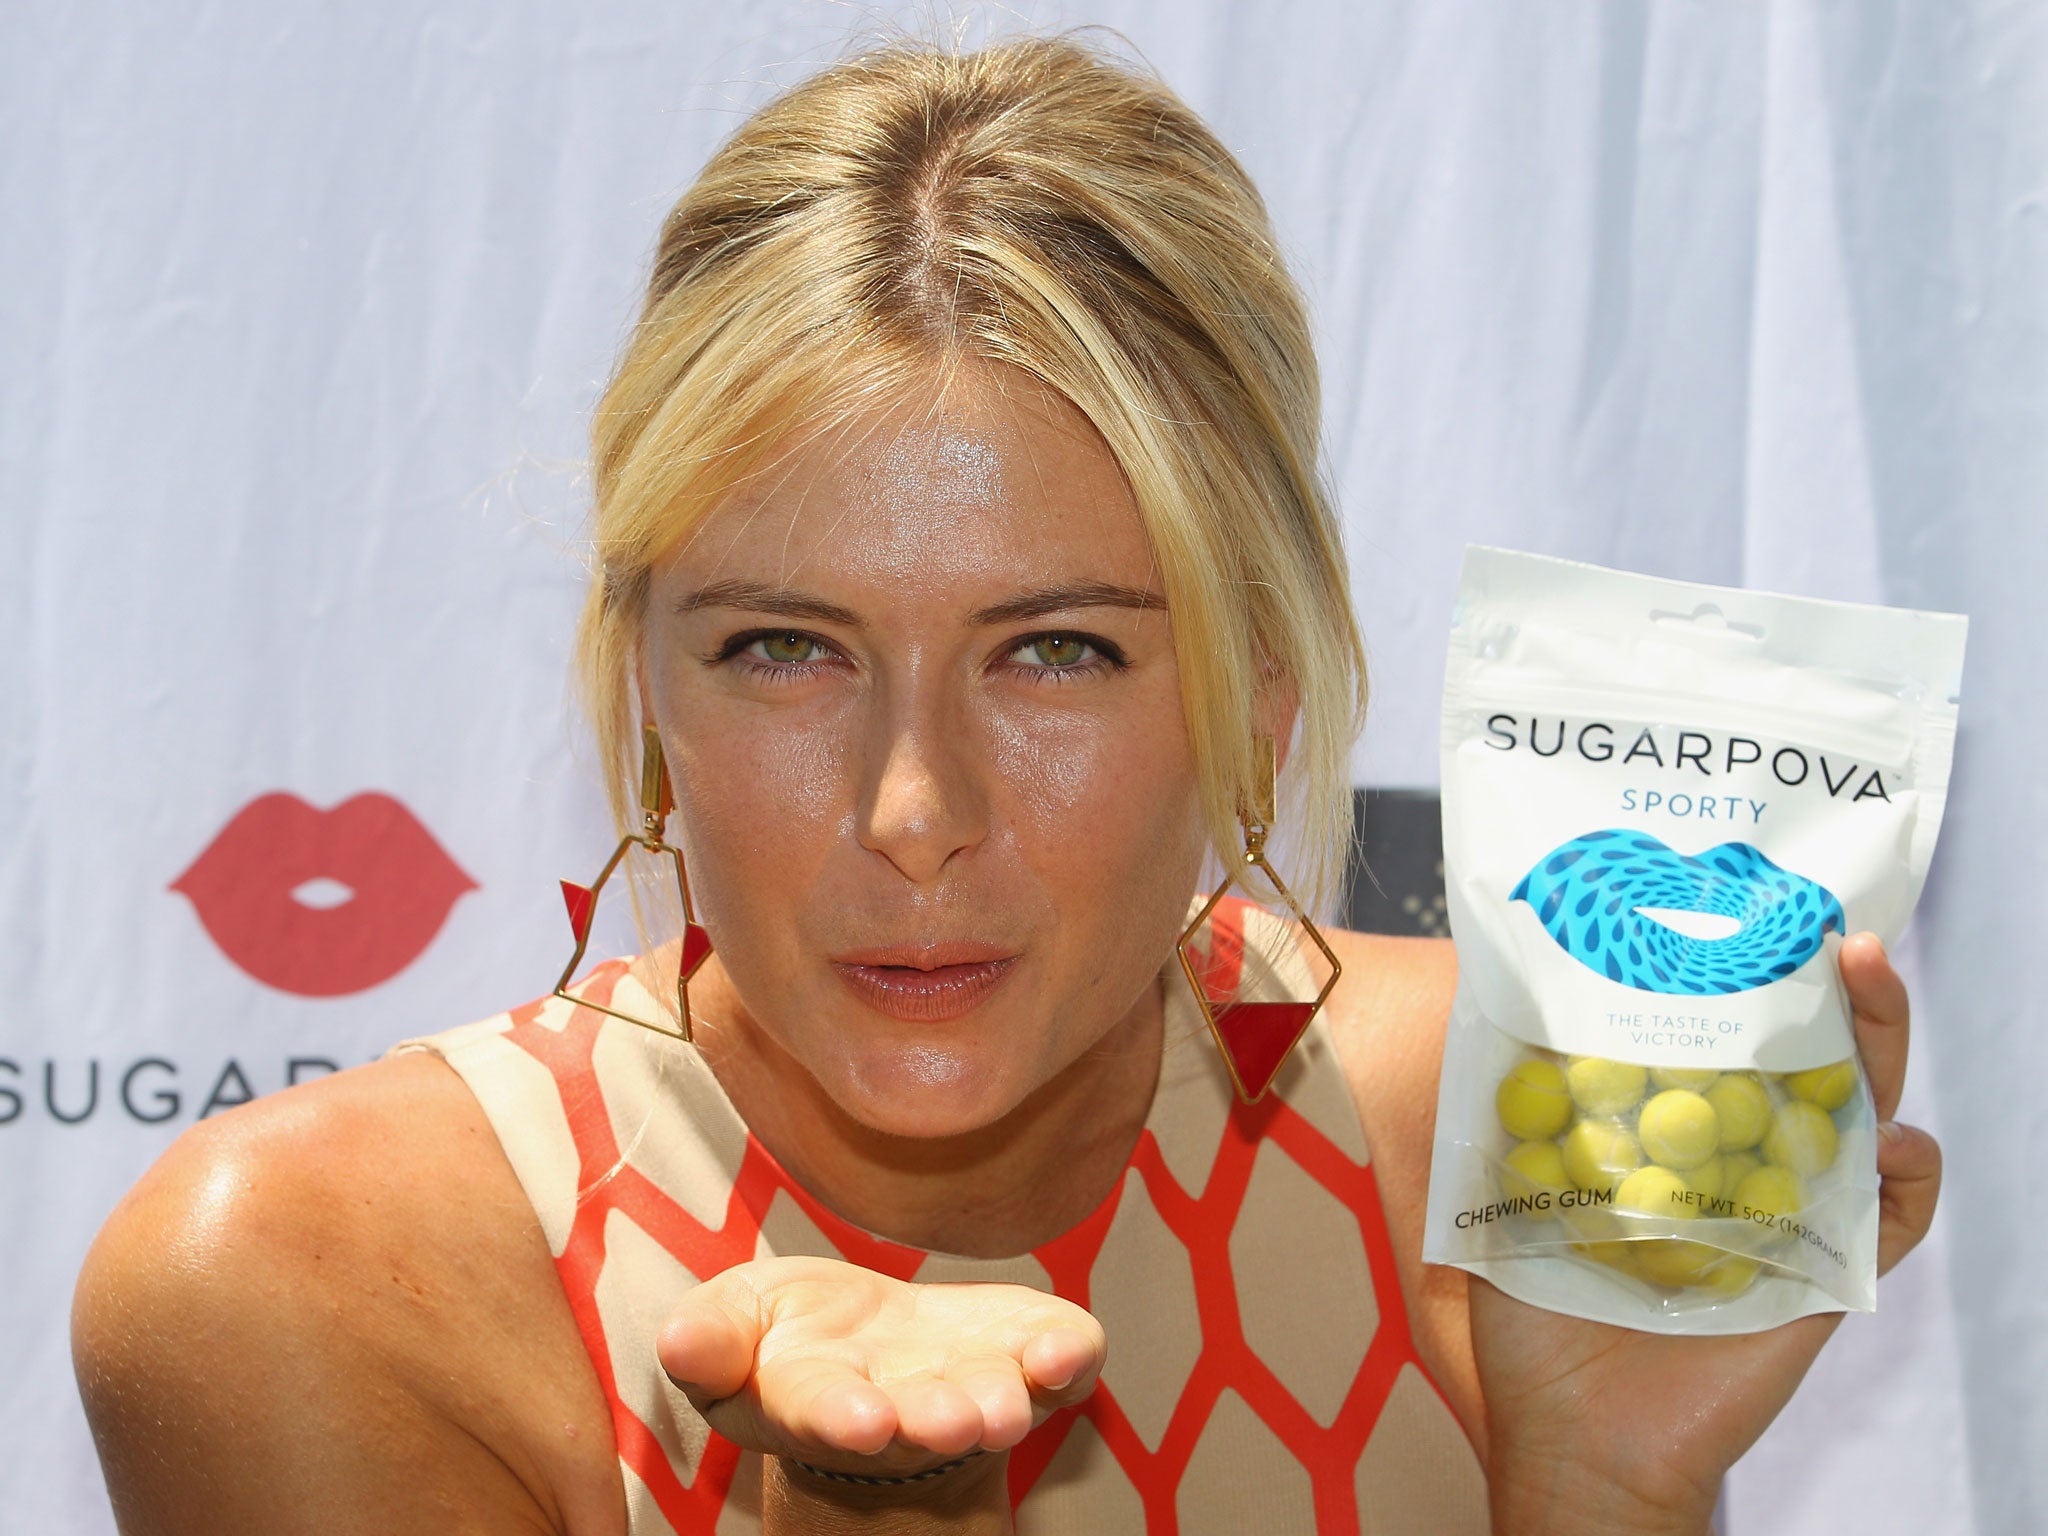 Money bags: Maria Sharapova retails her own-brand sweets at £3.70 a go. More than 250,000 units have already been sold